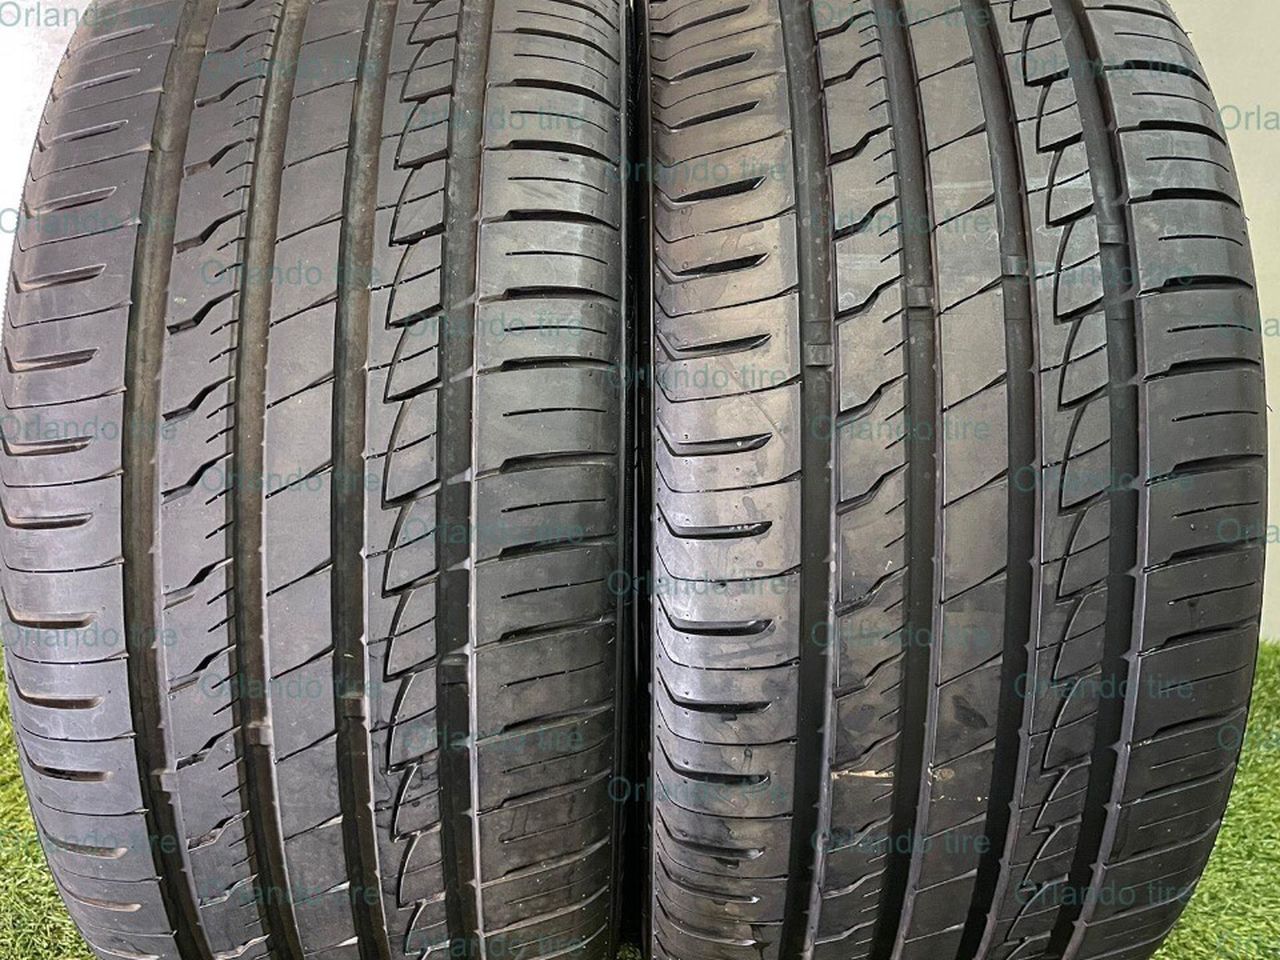 D46  245 40 17 95W  Ironman  iMove Gen 2 AS   2 Used Tires  95% Life 